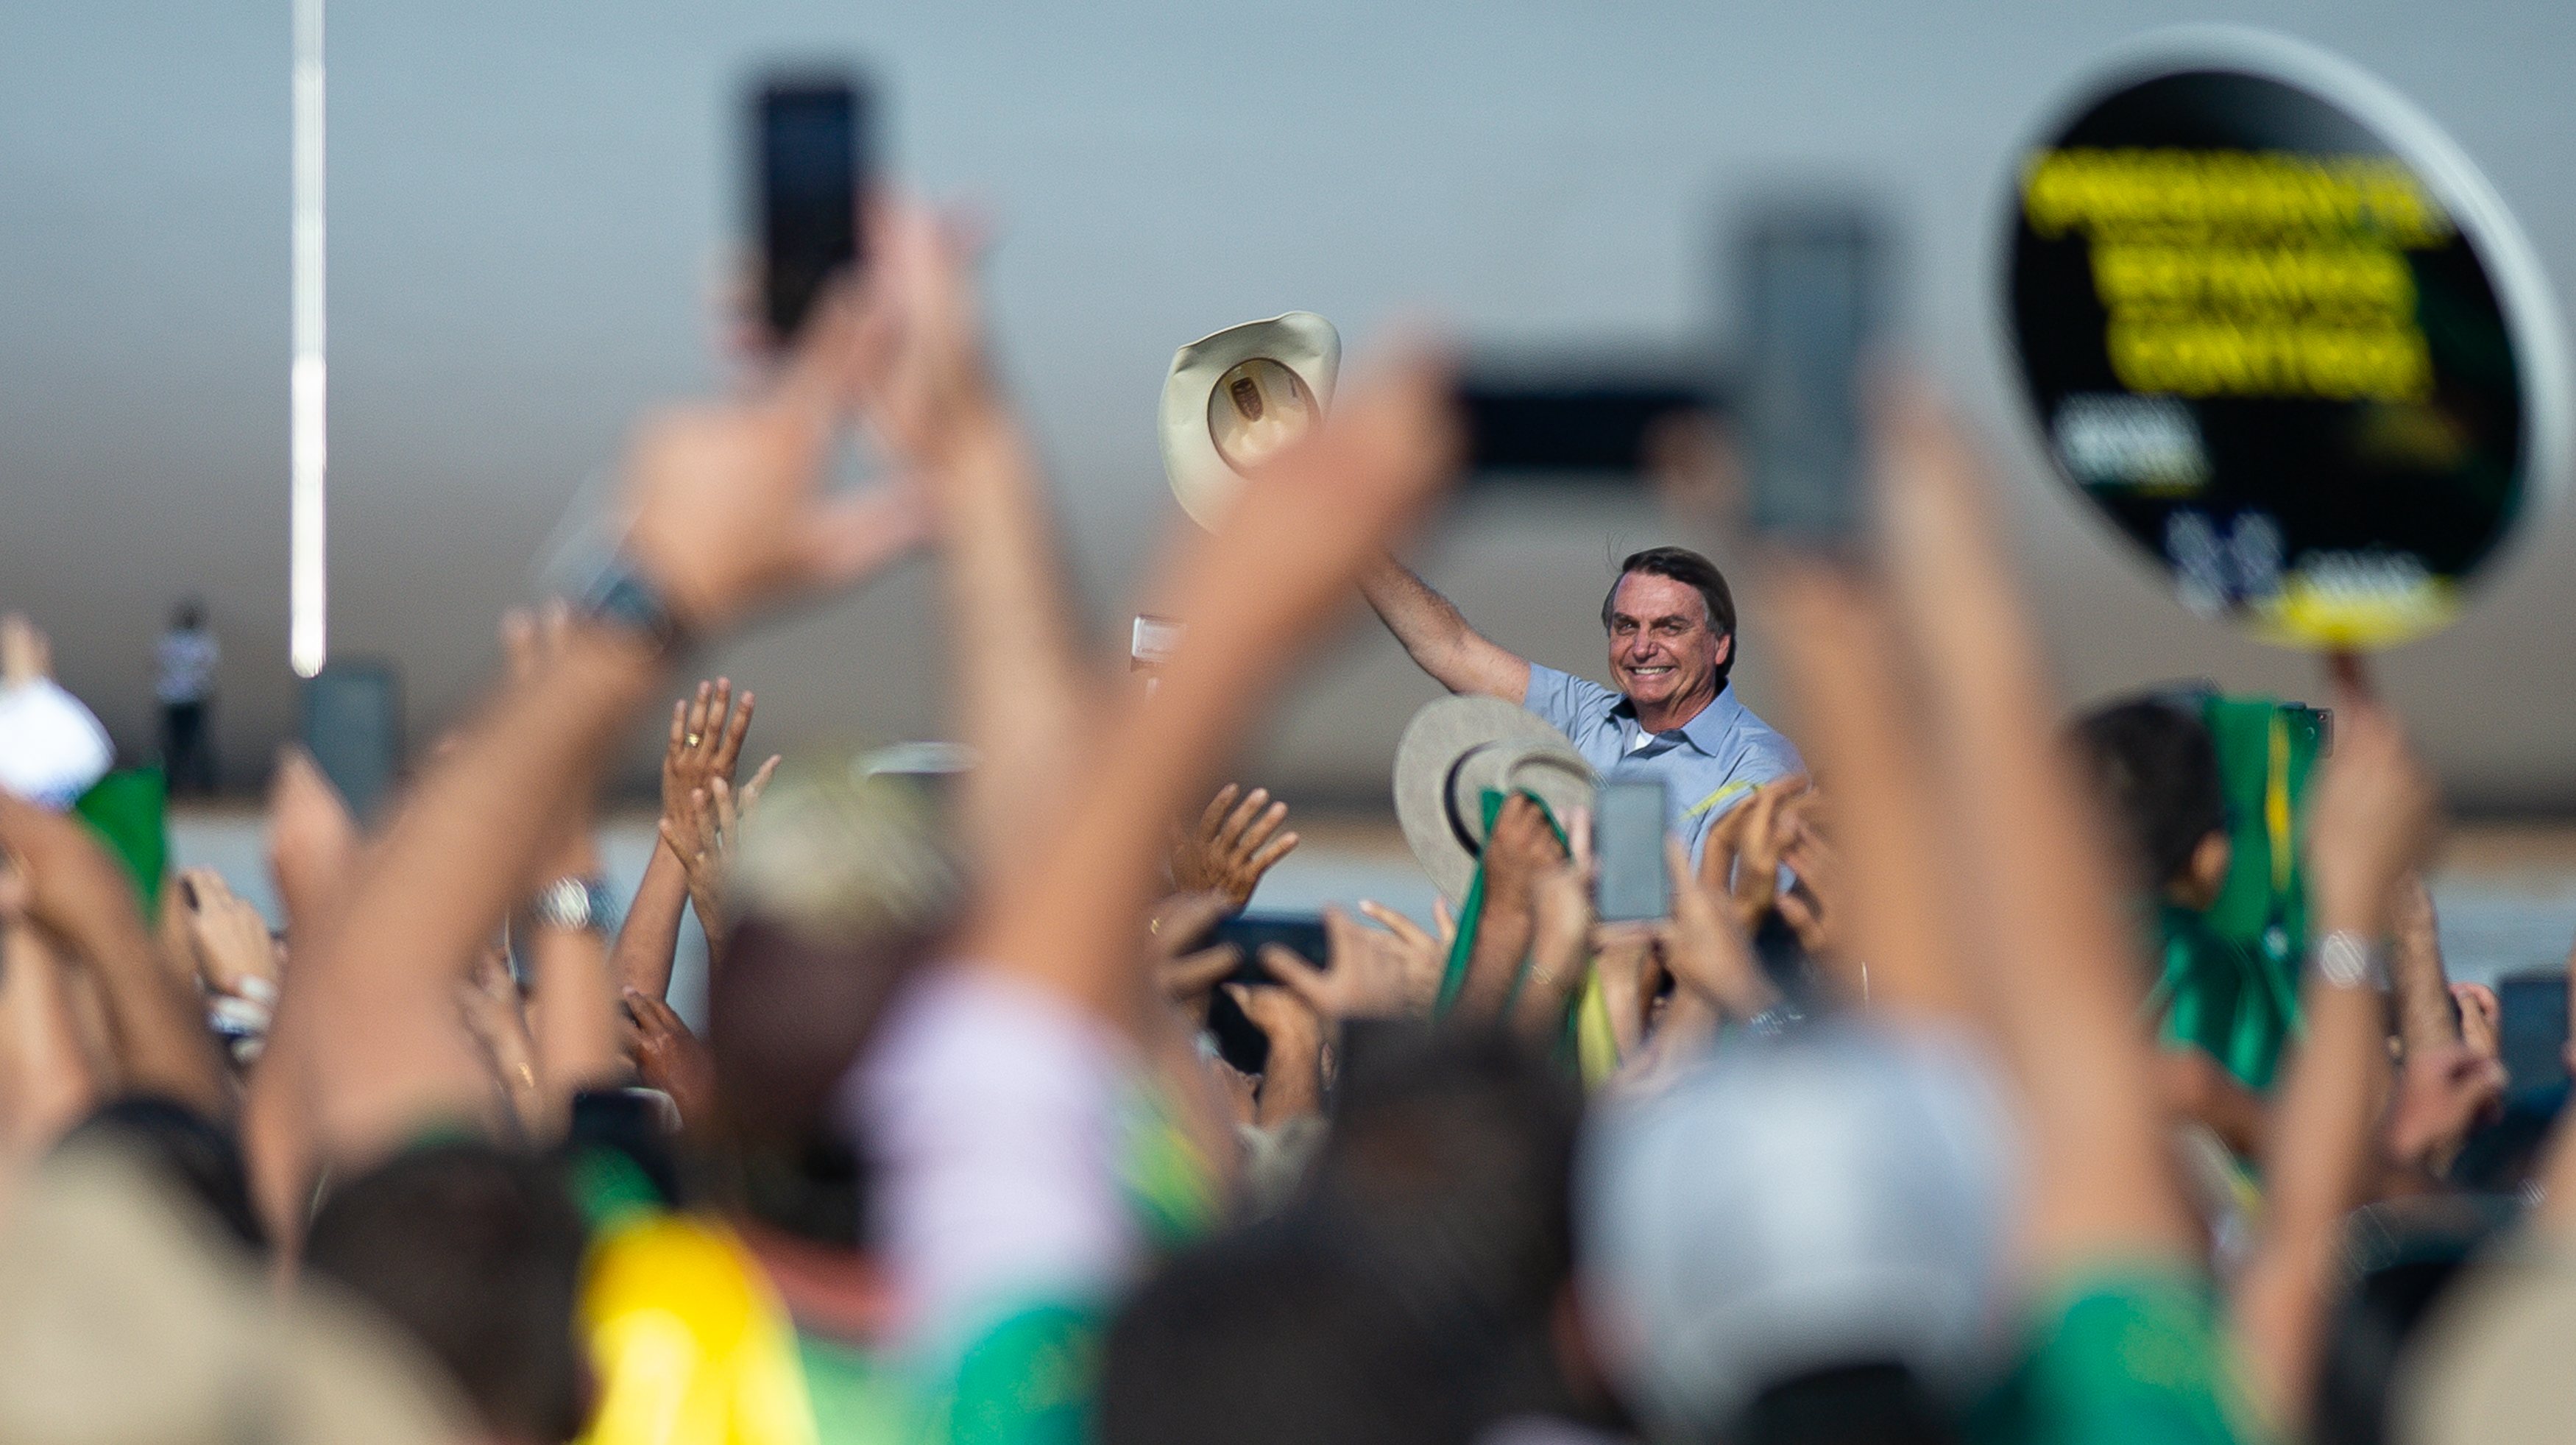 President Bolsonaro Attends a Protest in Support of His Government